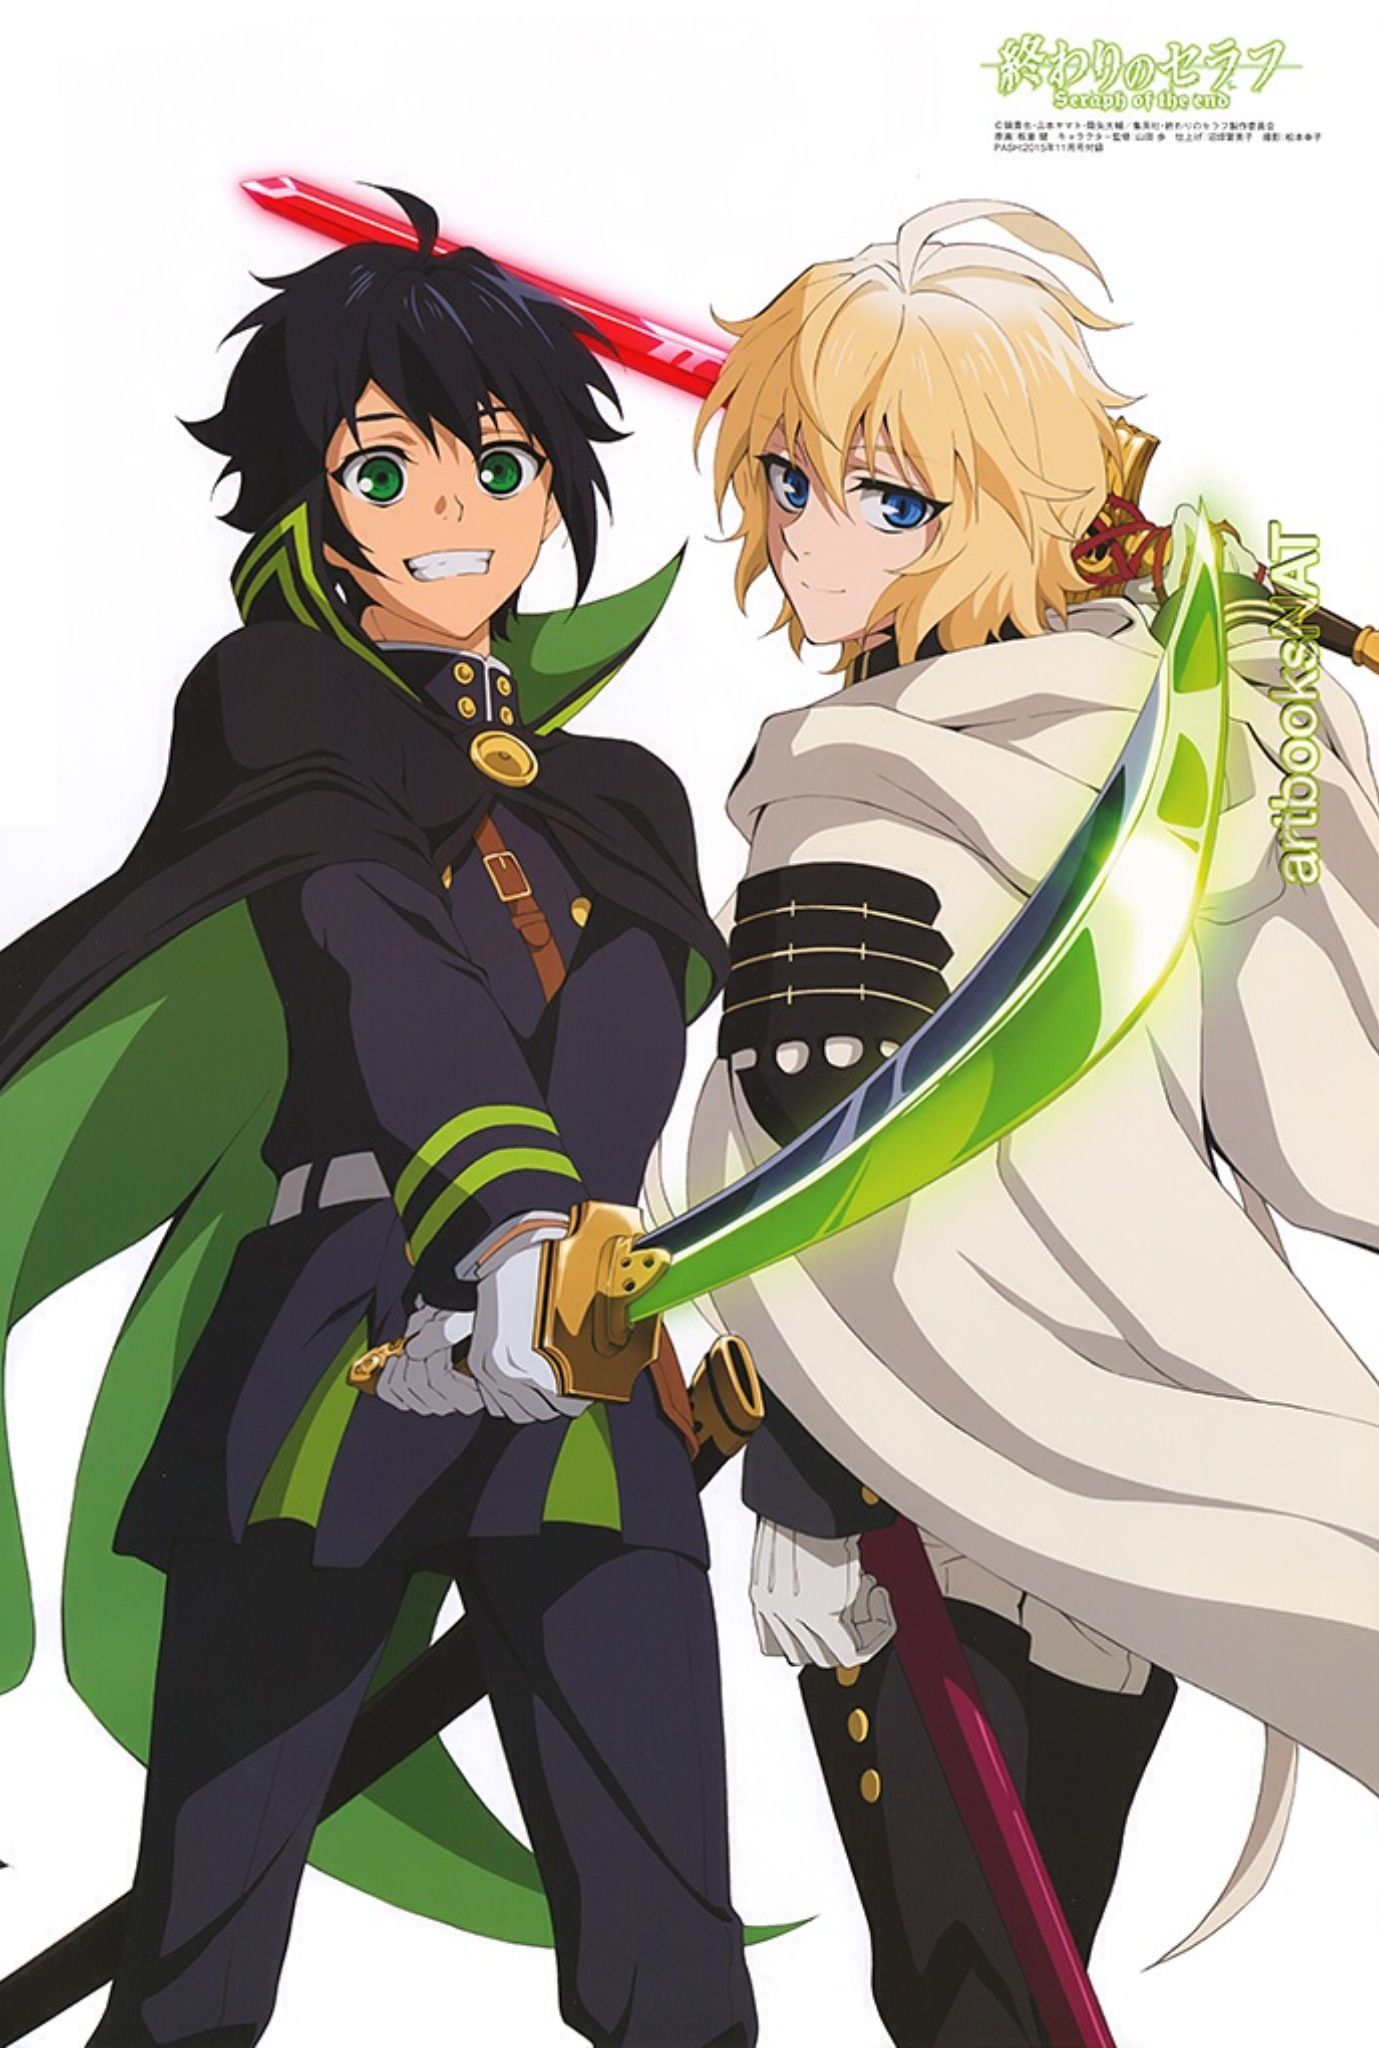 Seraph of the End Picture